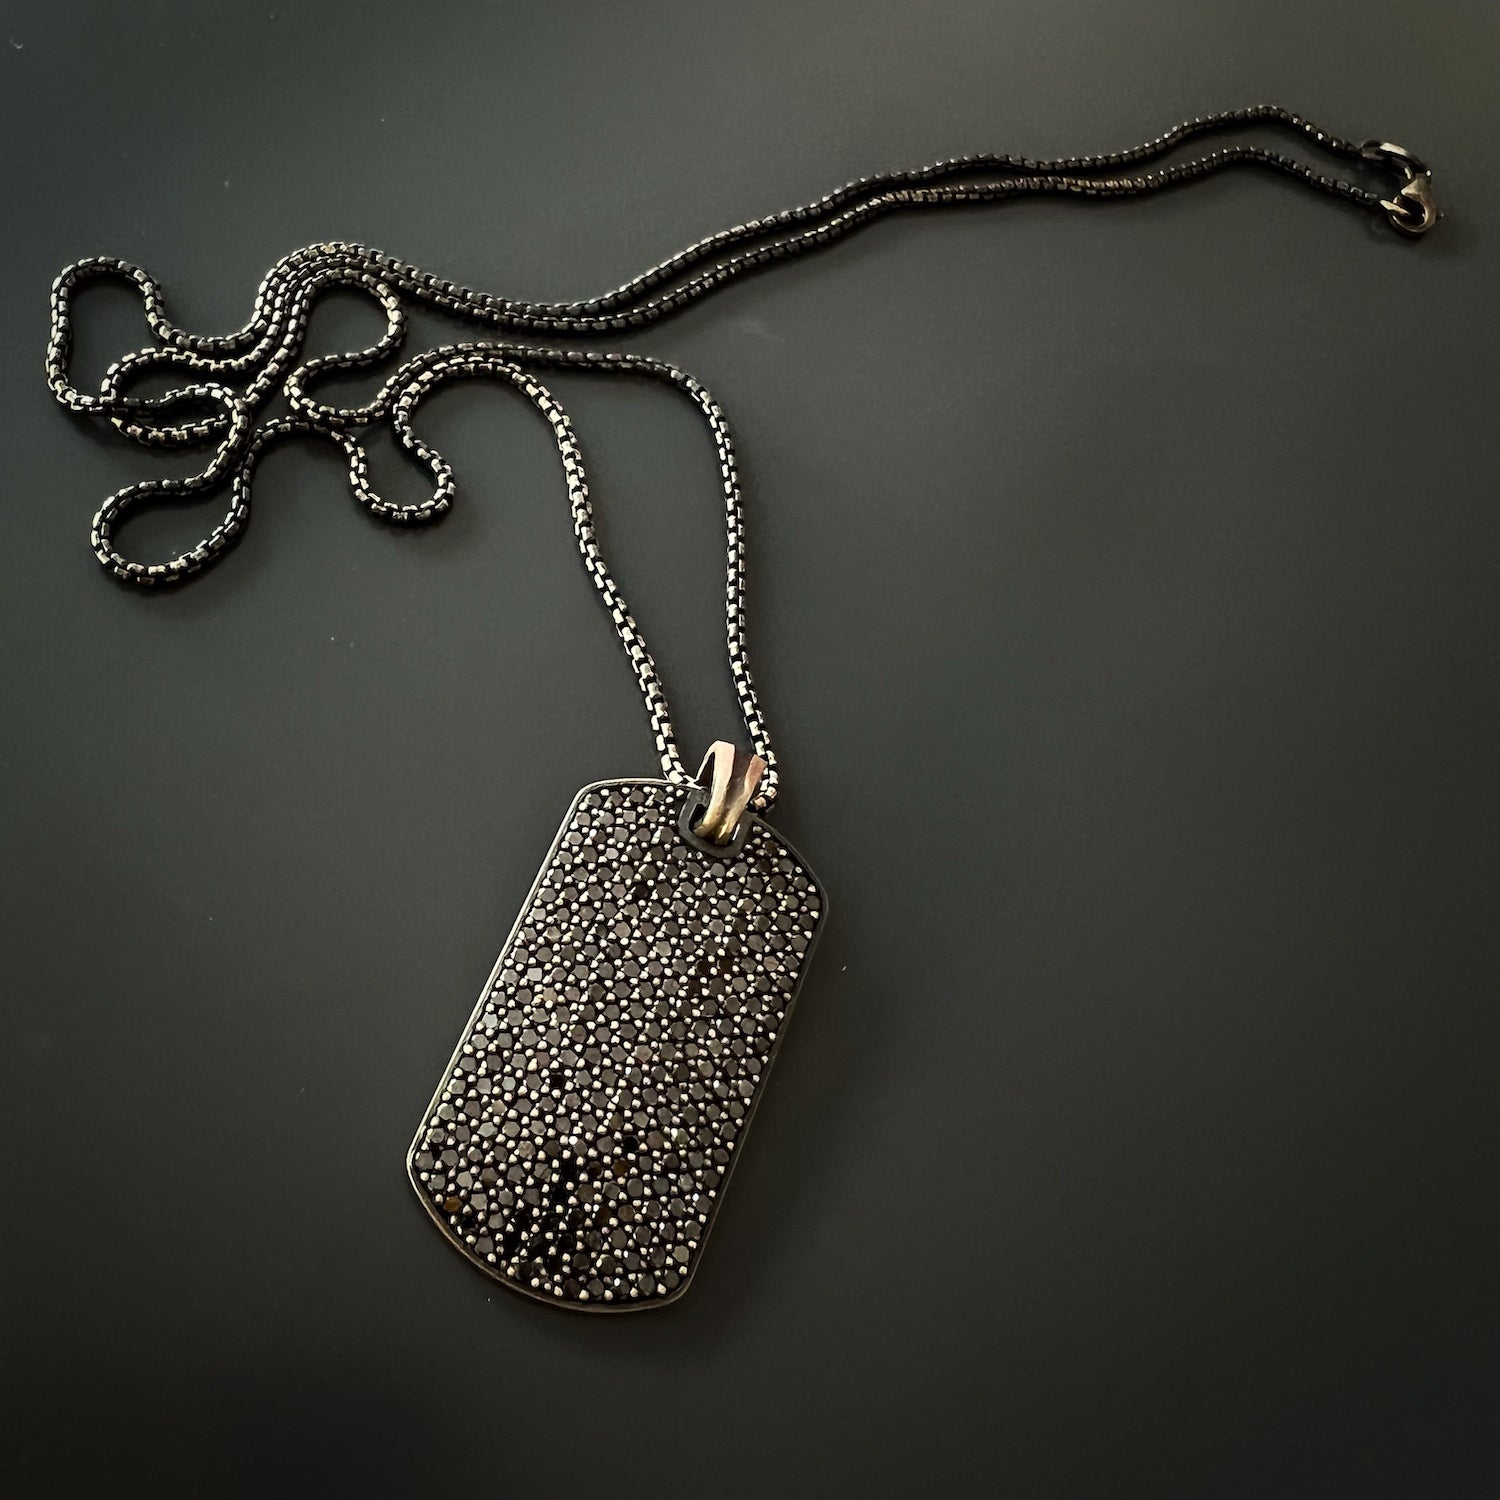 Close-up of the pendant's black diamond pave, capturing the intricate details and luxurious sparkle of the necklace.